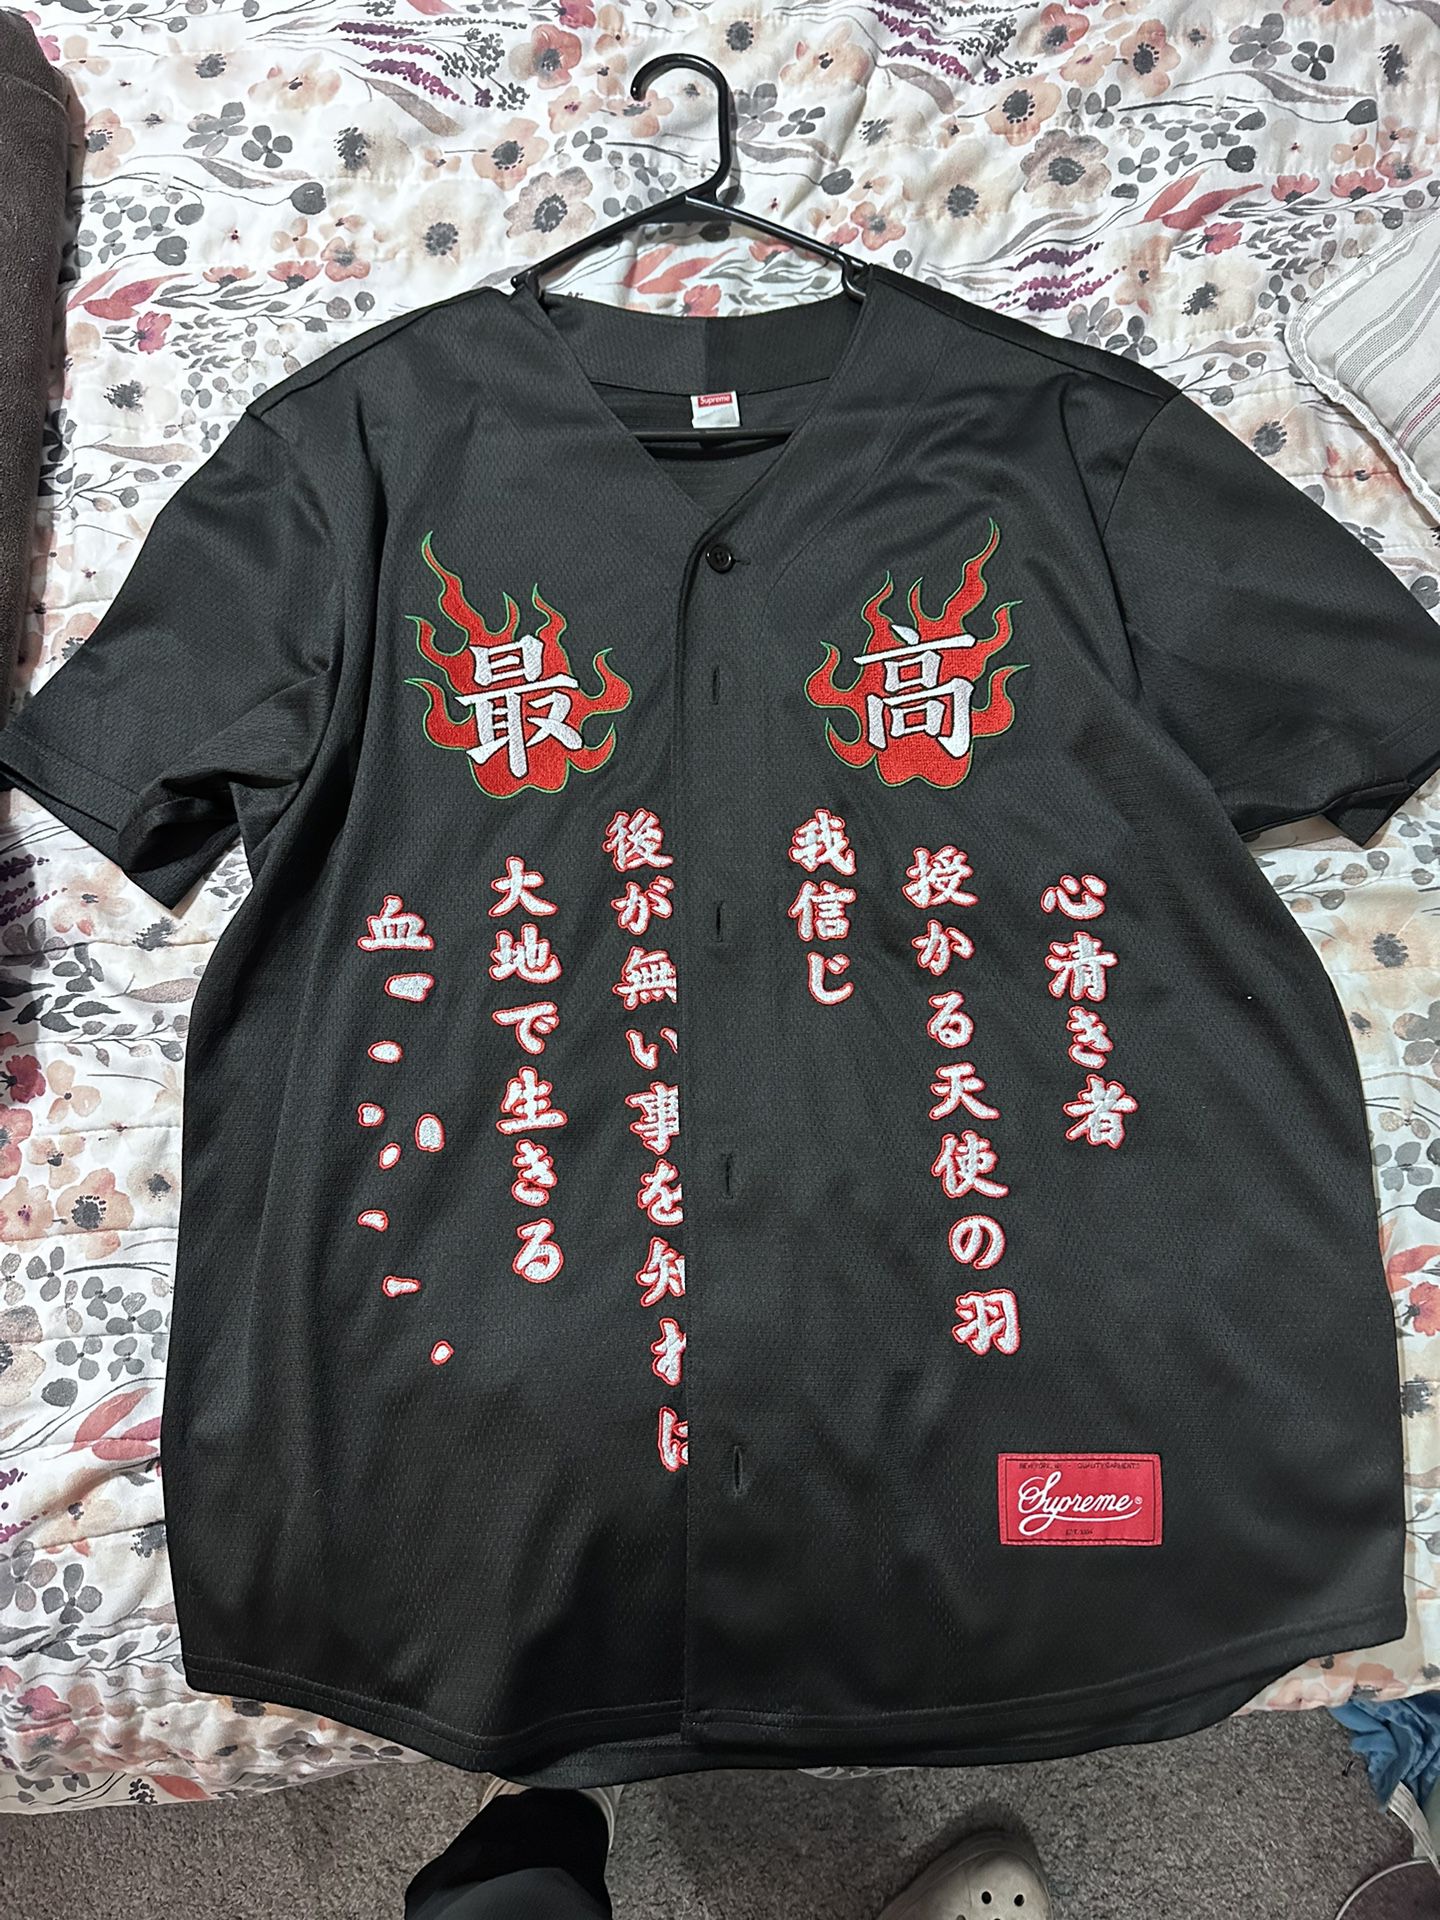 Supreme Tiger Embroidered Jersey